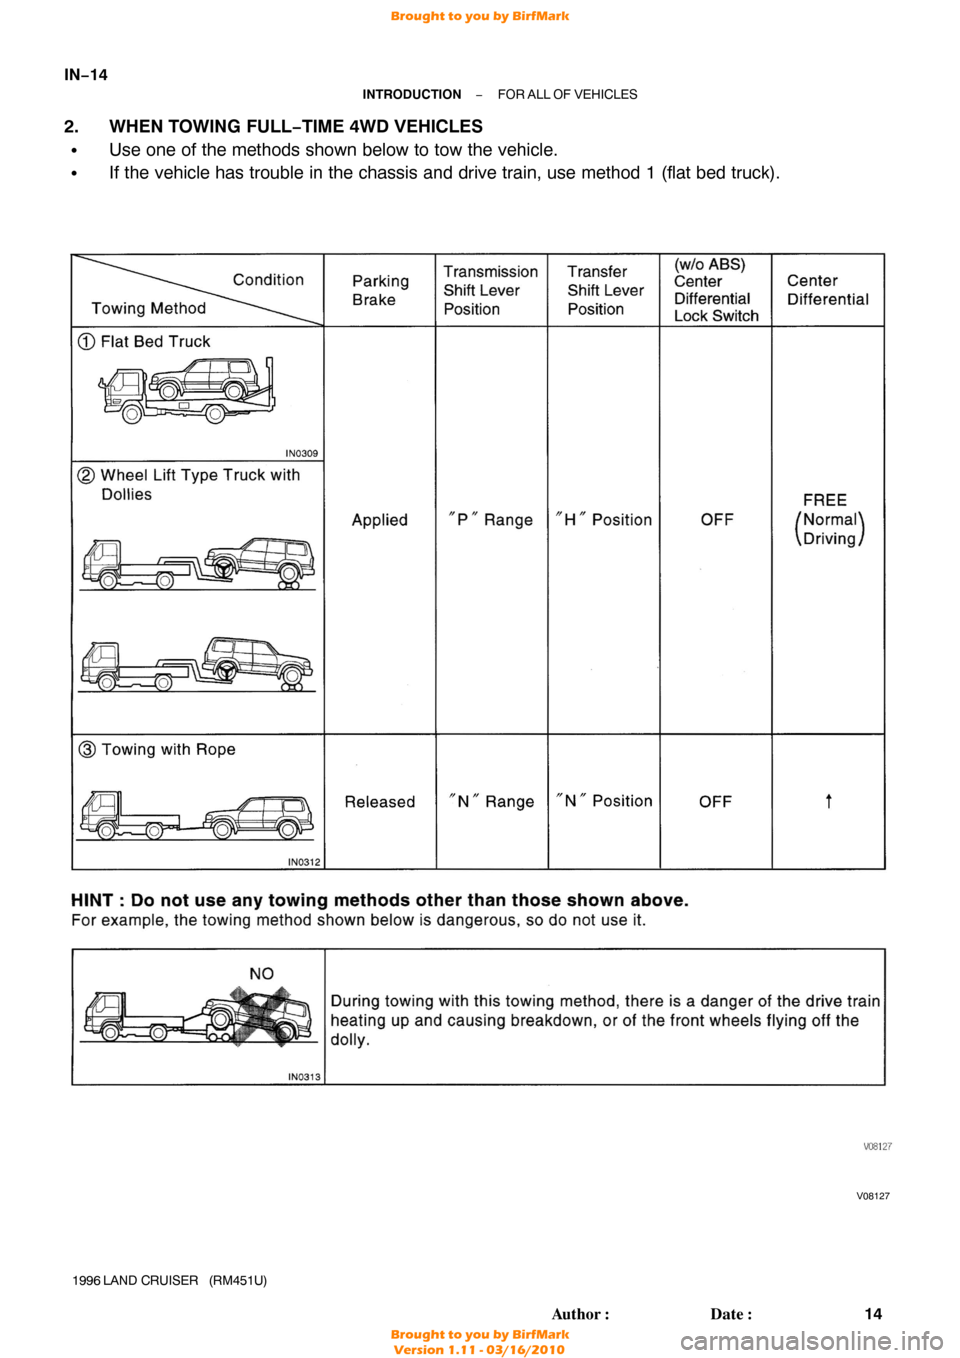 TOYOTA LAND CRUISER 1996 J80 User Guide V08127
IN−14
−
INTRODUCTION FOR ALL OF VEHICLES
14
Author: Date:
1996 LAND  CRUISER   (RM451U)
2. WHEN TOWING FULL −TIME 4WD VEHICLES
Use one of the methods shown below to tow the vehicle.
I